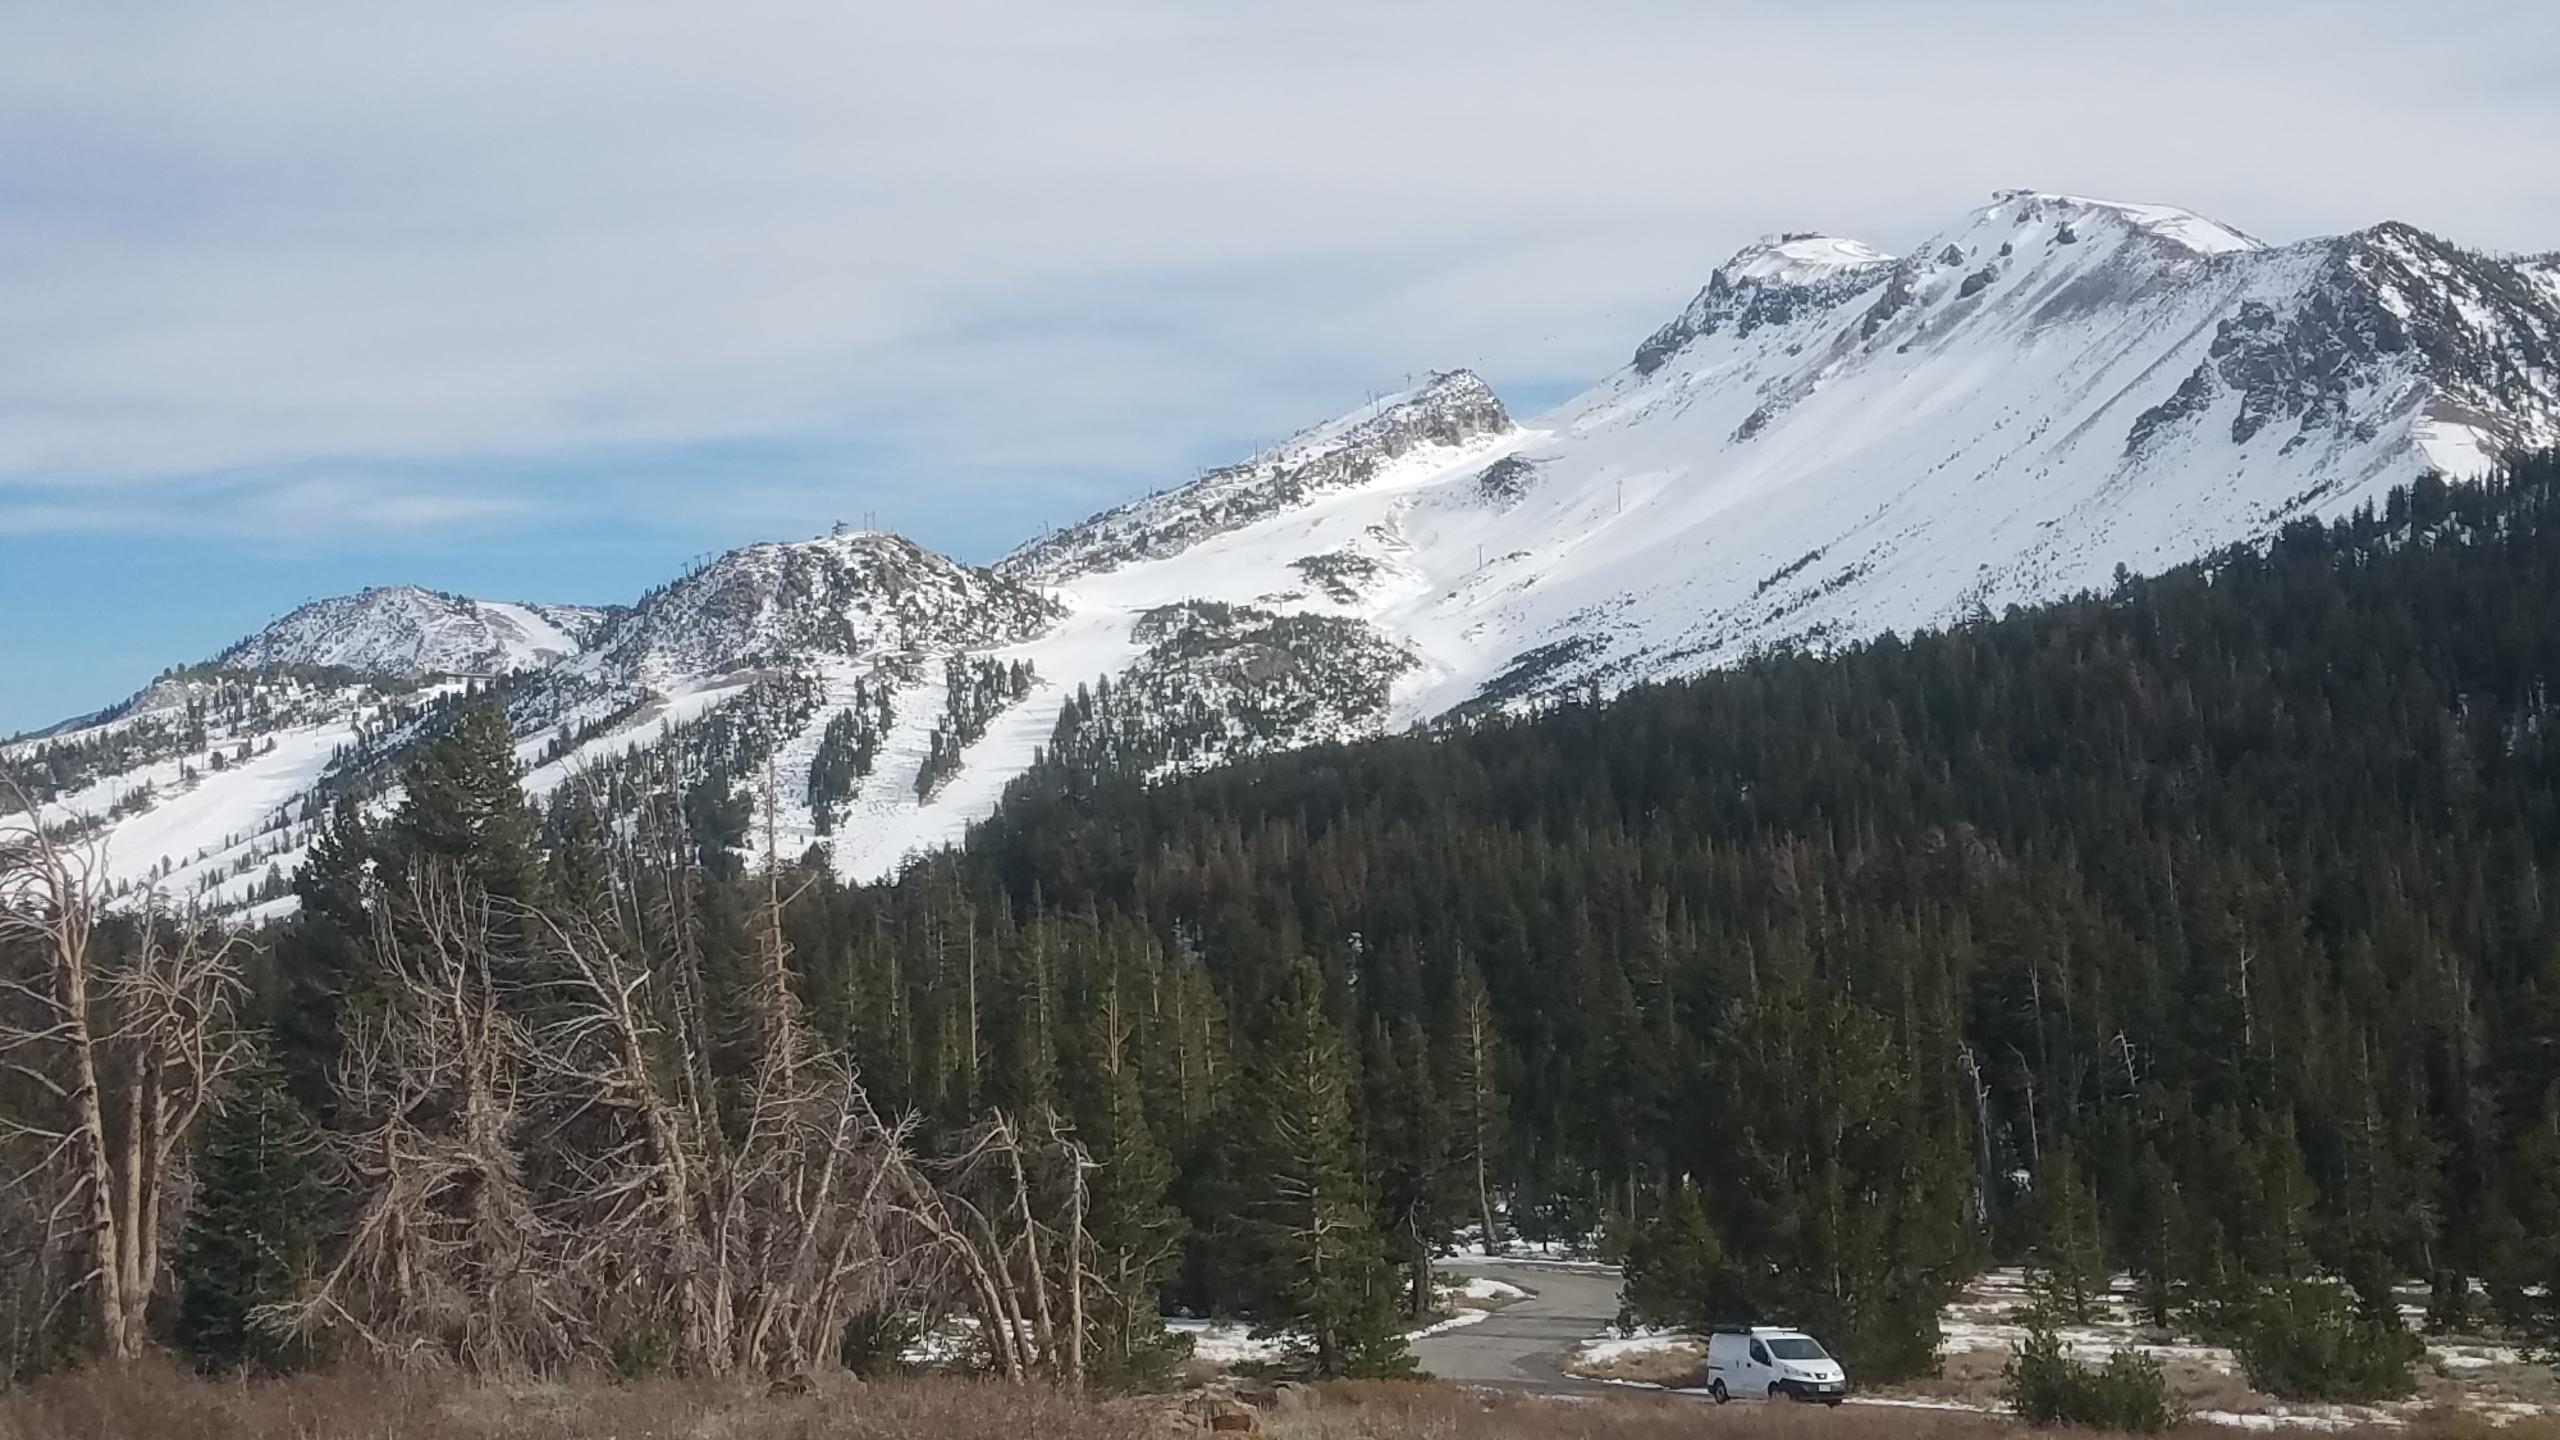 View of Mammoth Mountain from Minaret Vista @ 3:50 PM Tuesday - Photo by Snow Reporter Kurt